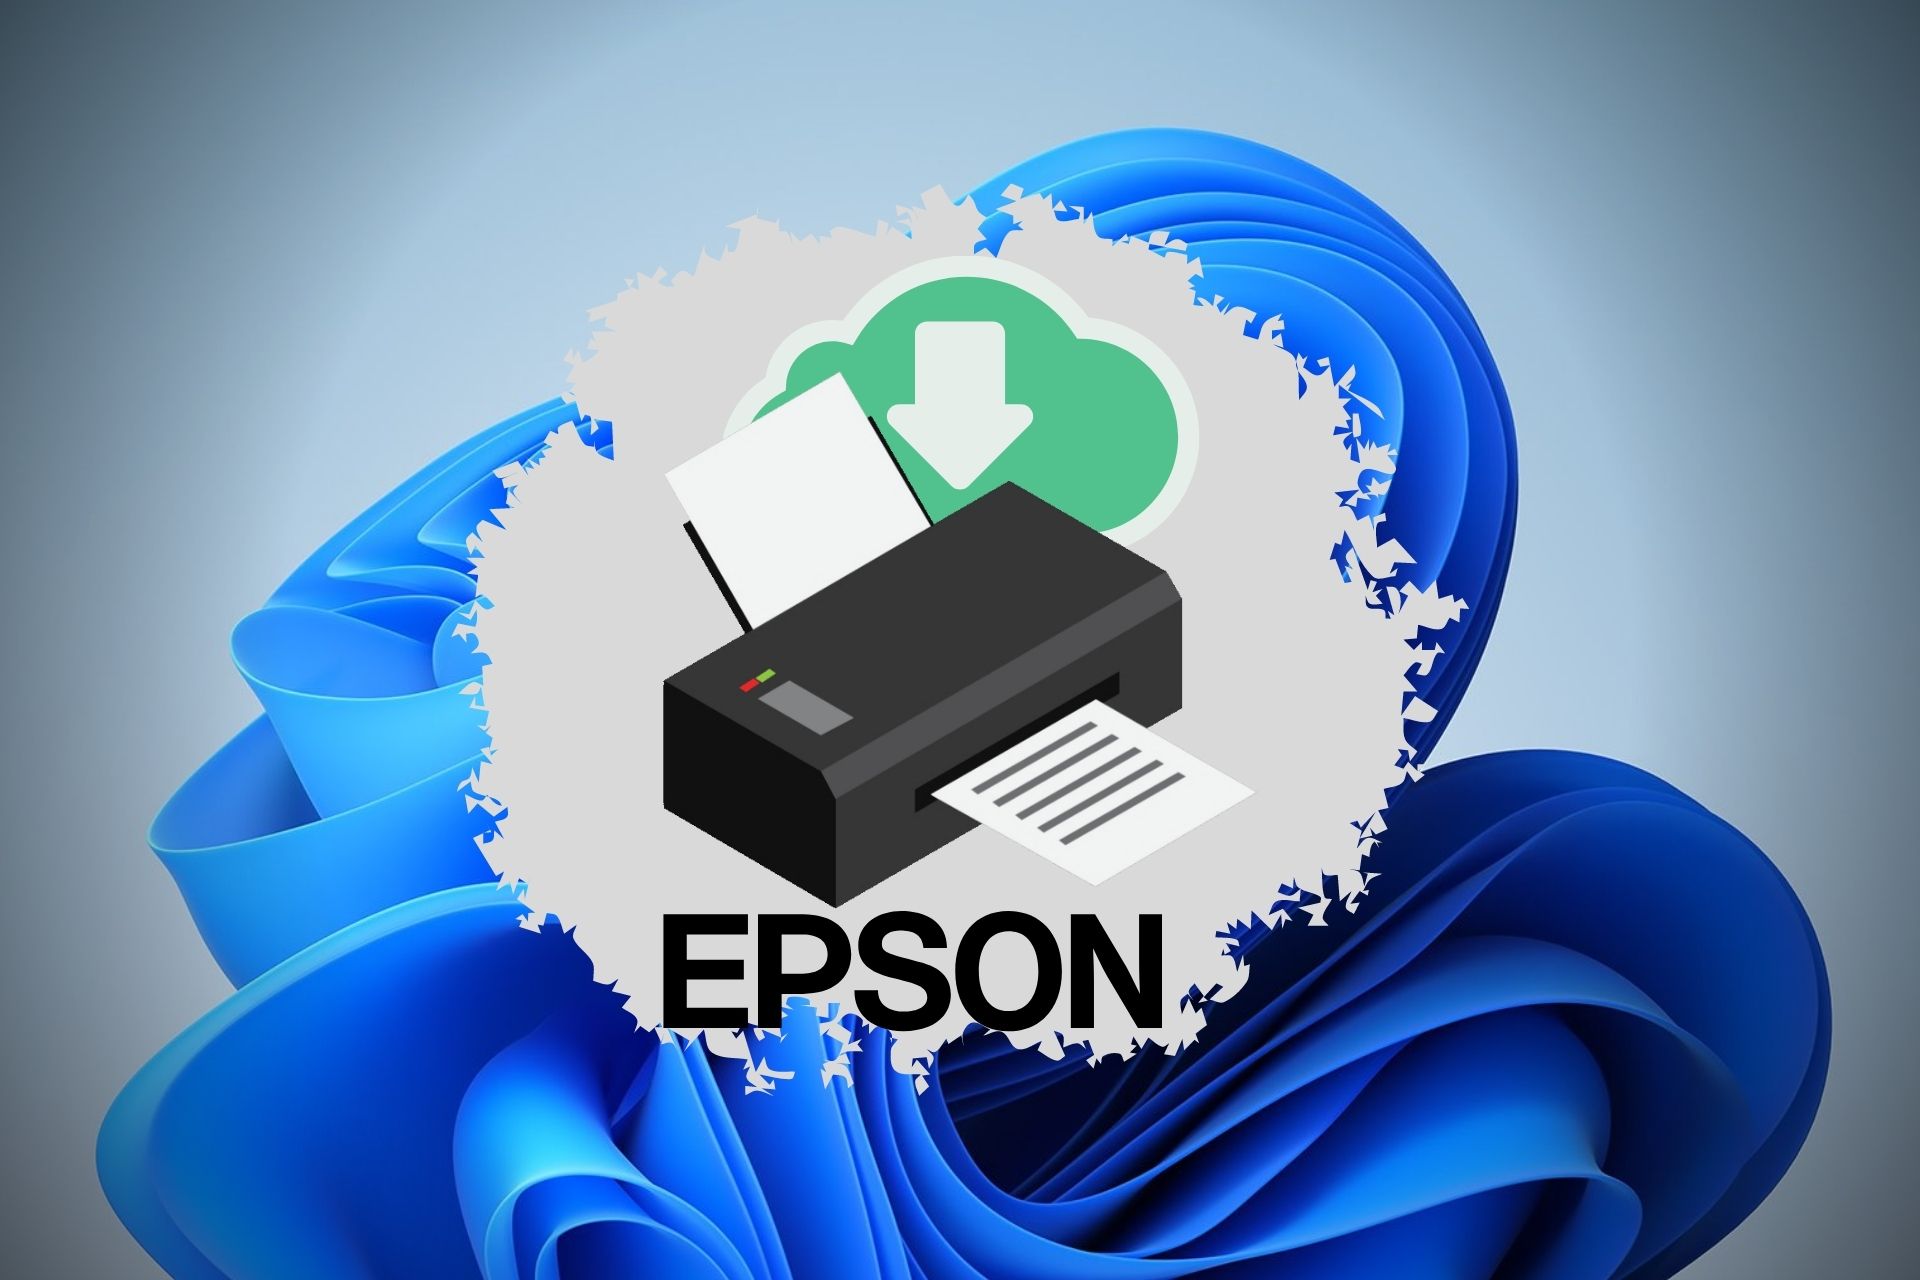 How to download Epson ES-400 drivers in Windows 11